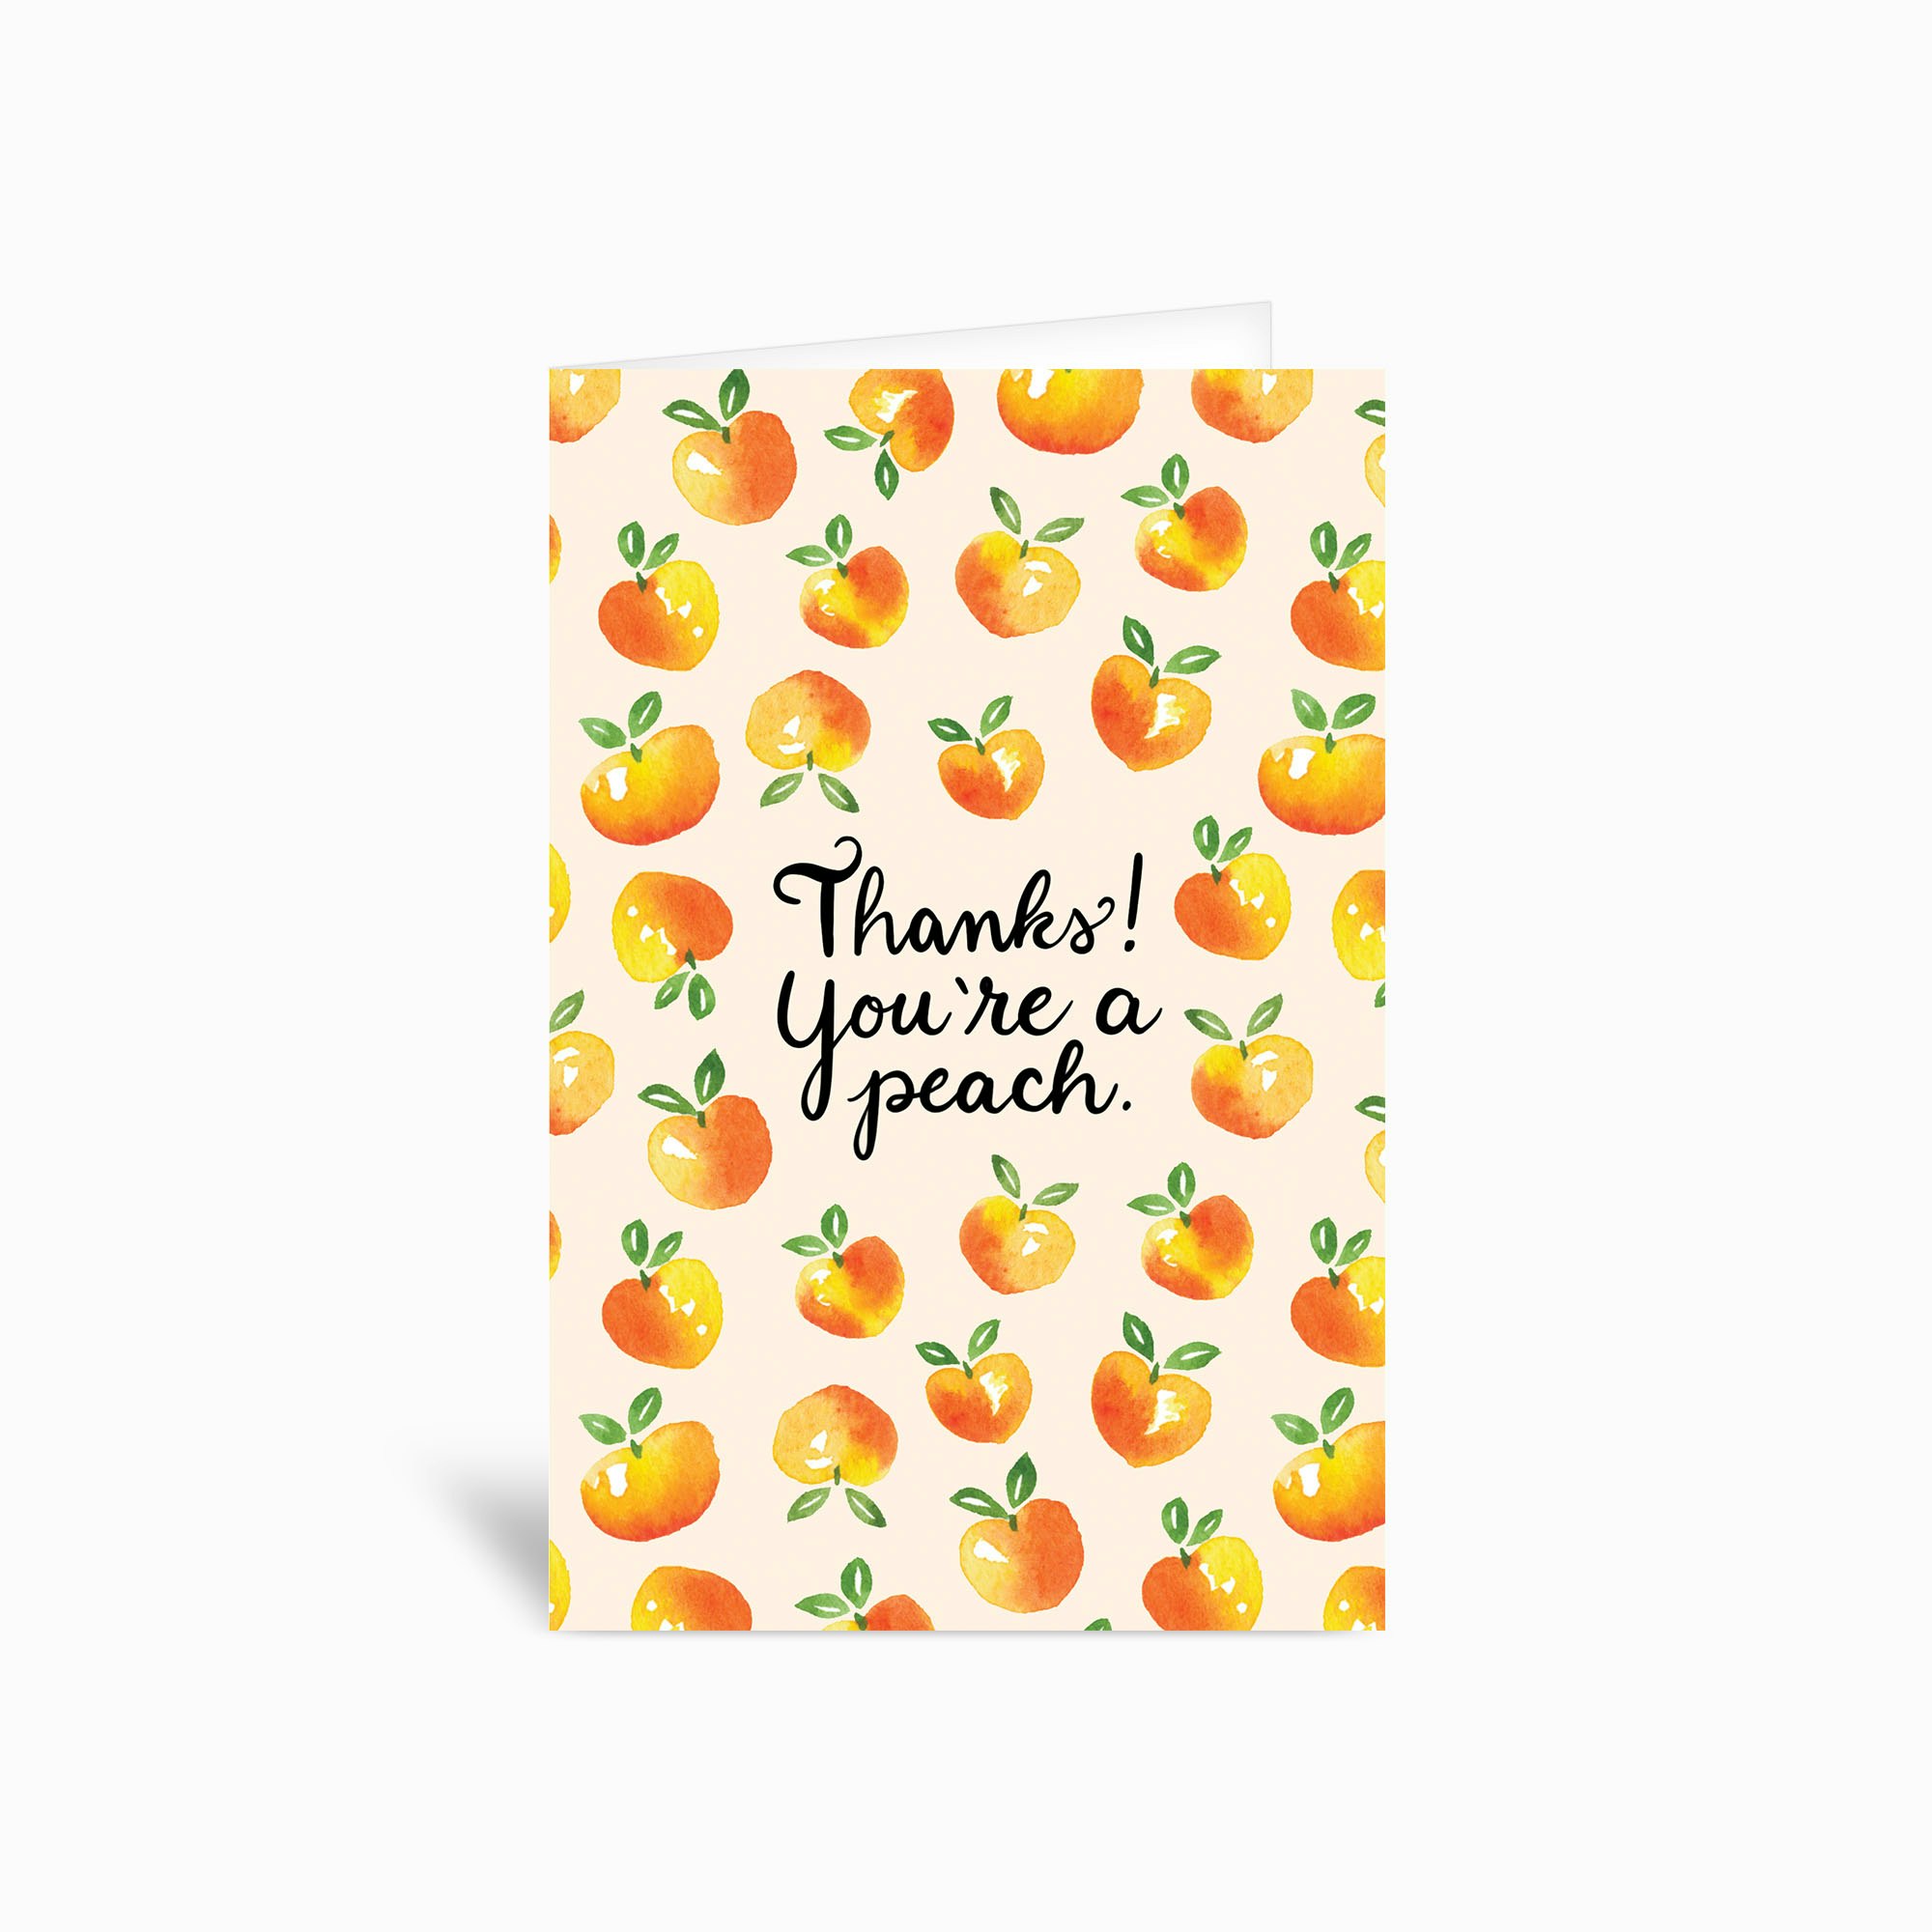 Thanks Youre A Peach Card 4x6 Greetings Card by Katie Perez - Fy